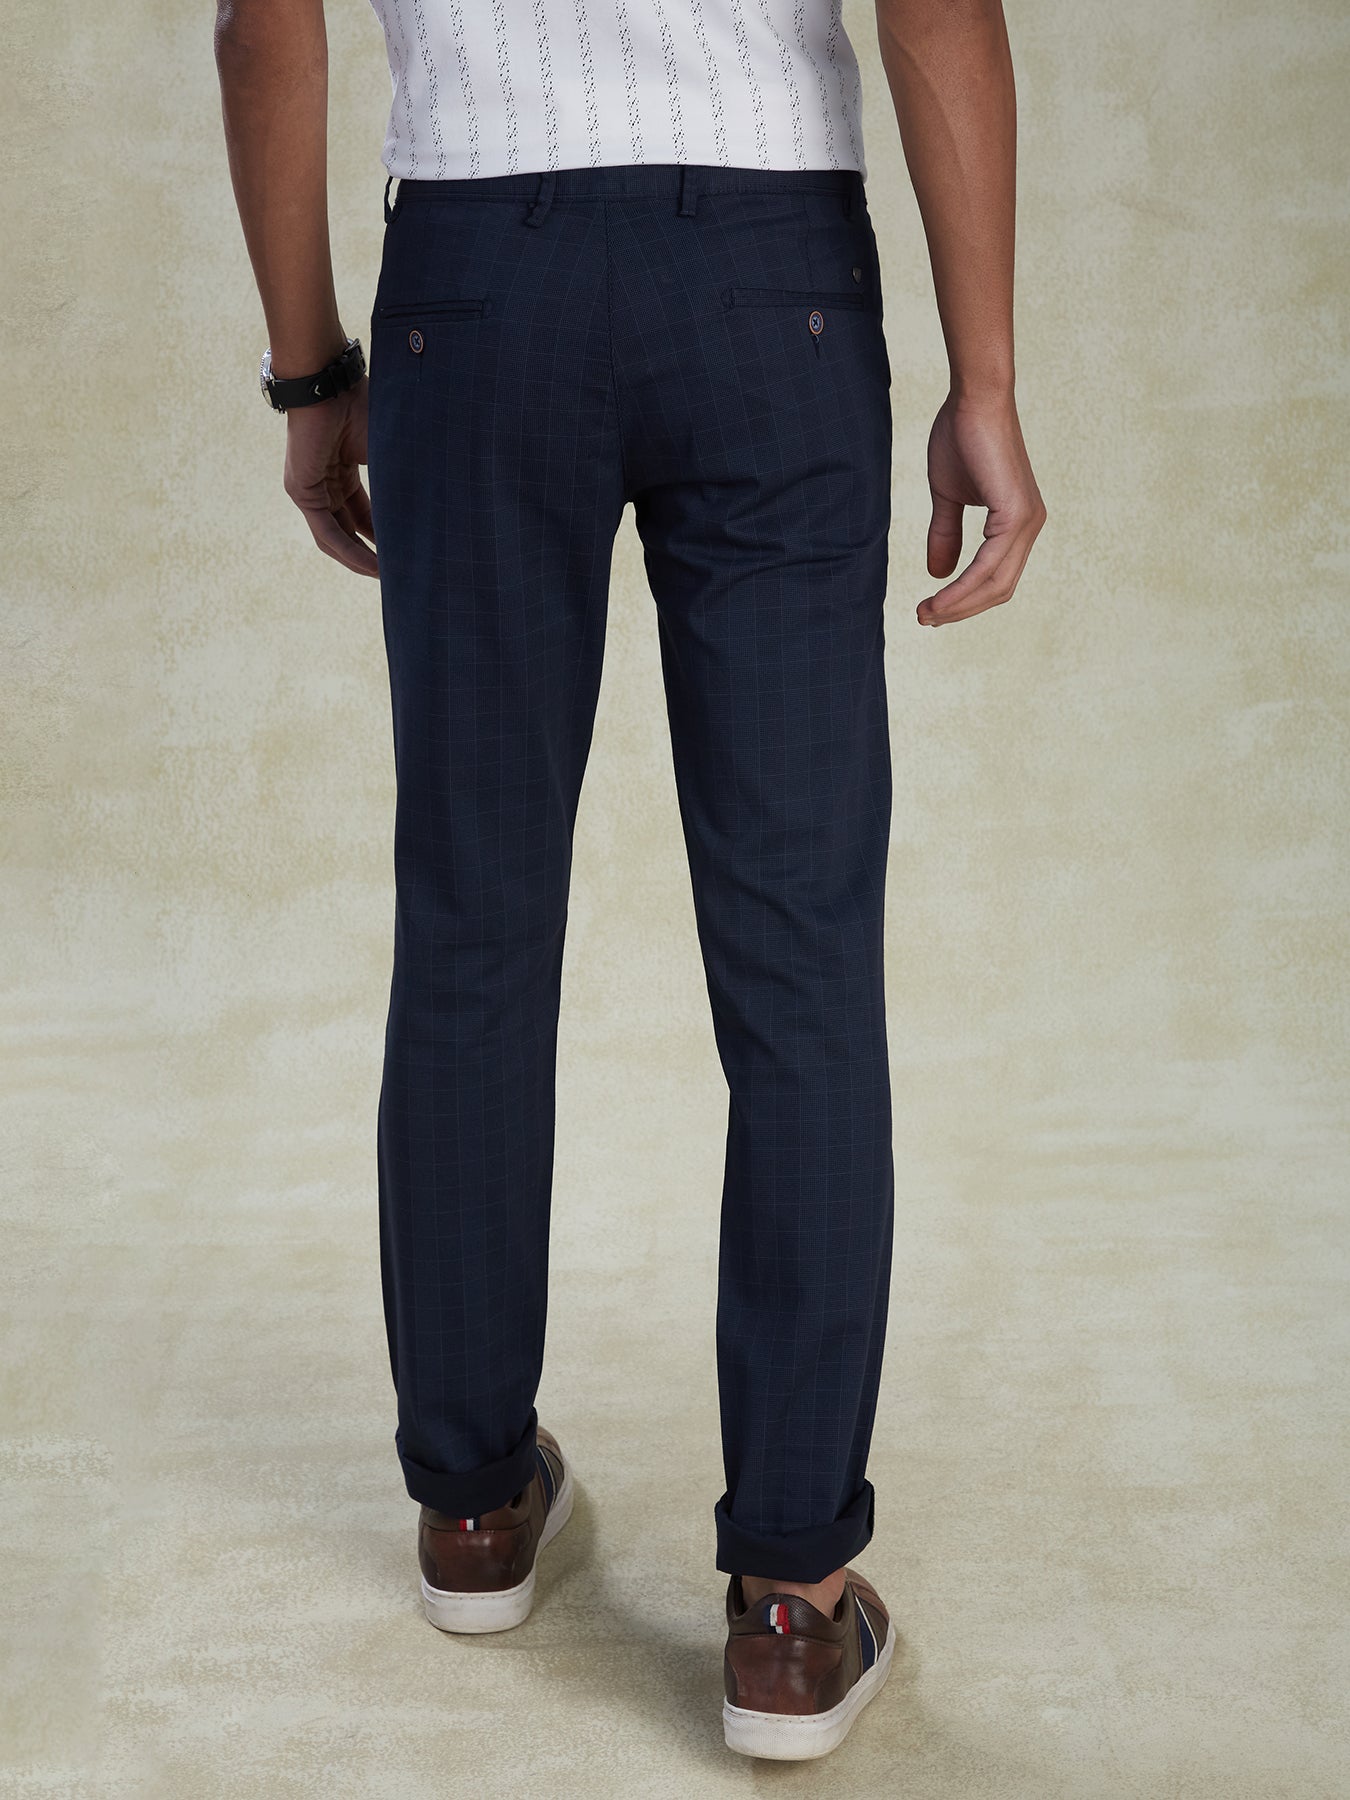 cotton-stretch-navy-blue-ultra-slim-fit-flat-front-casual-mens-trouser